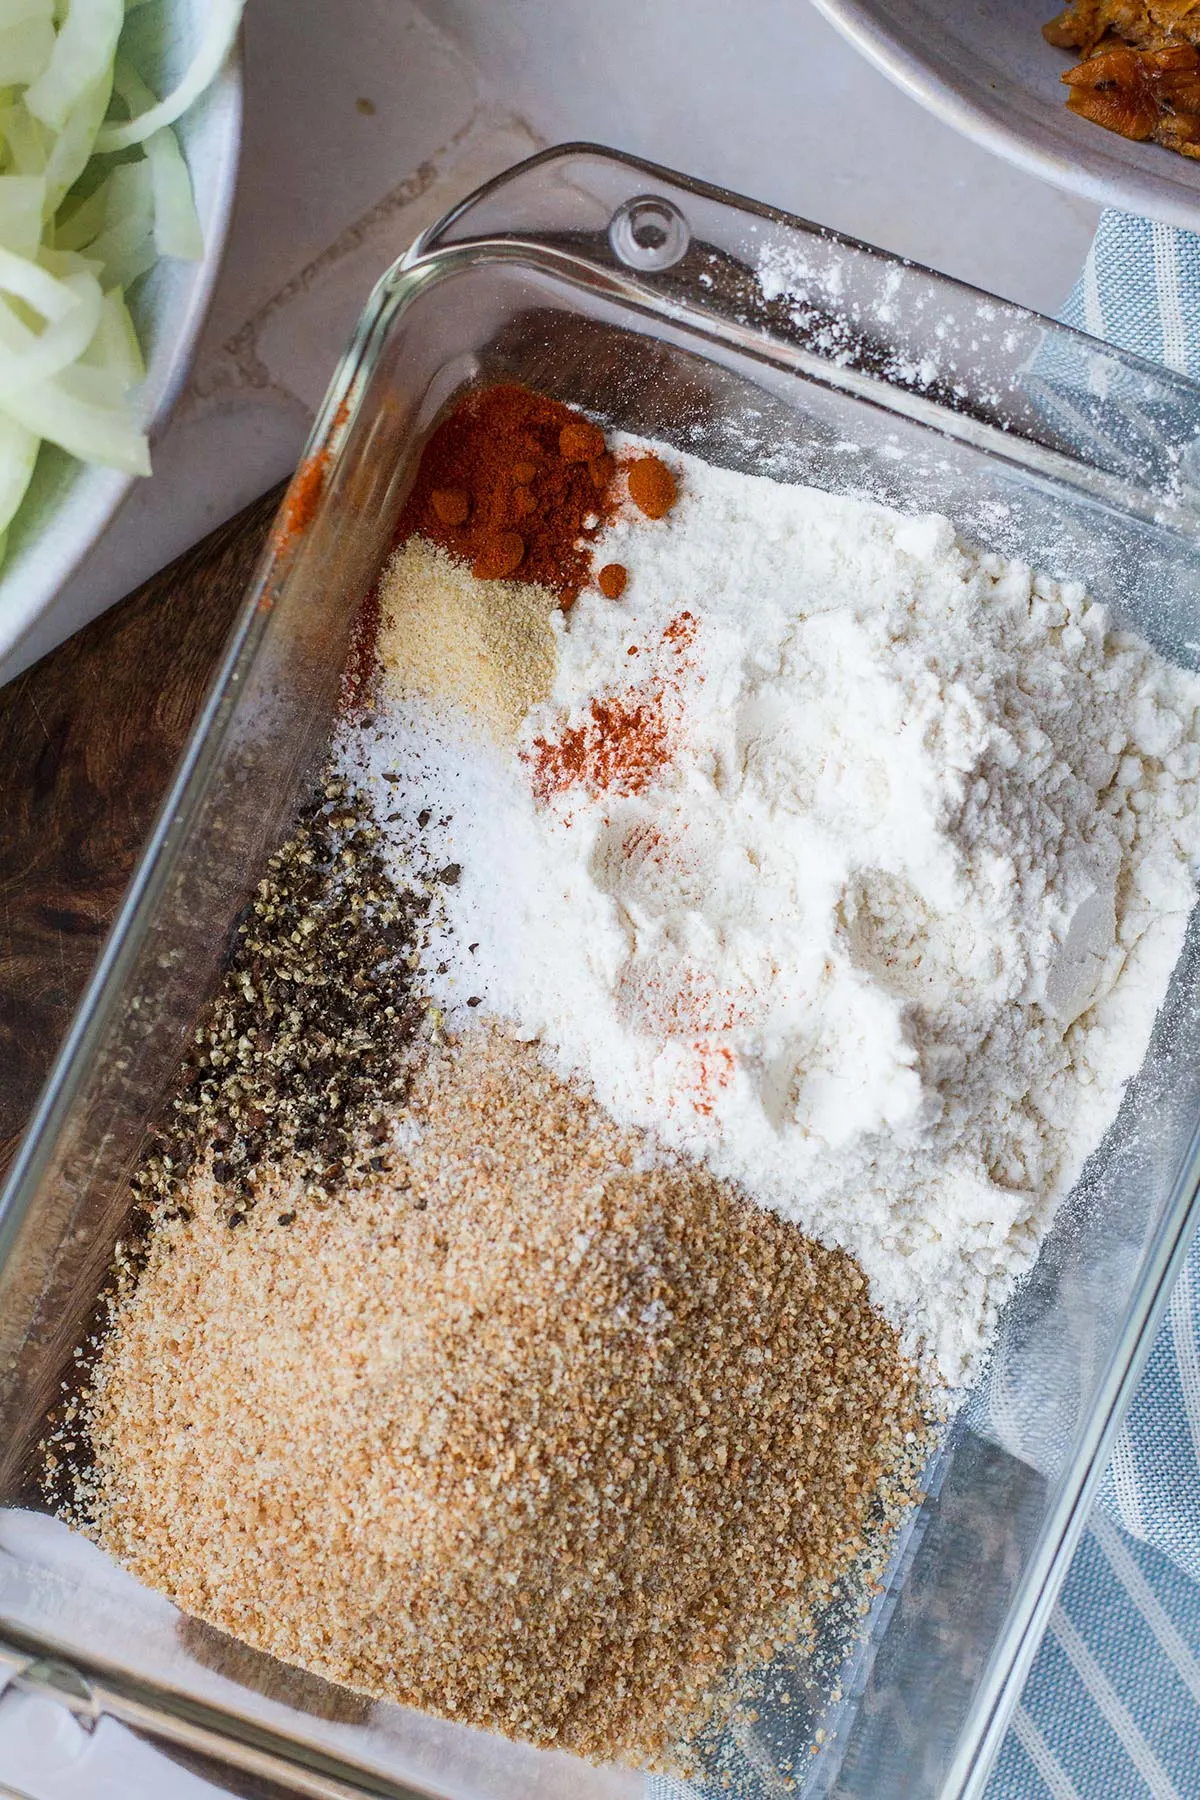 The ingredients for the breading: flour, spices and breadcrumbs.